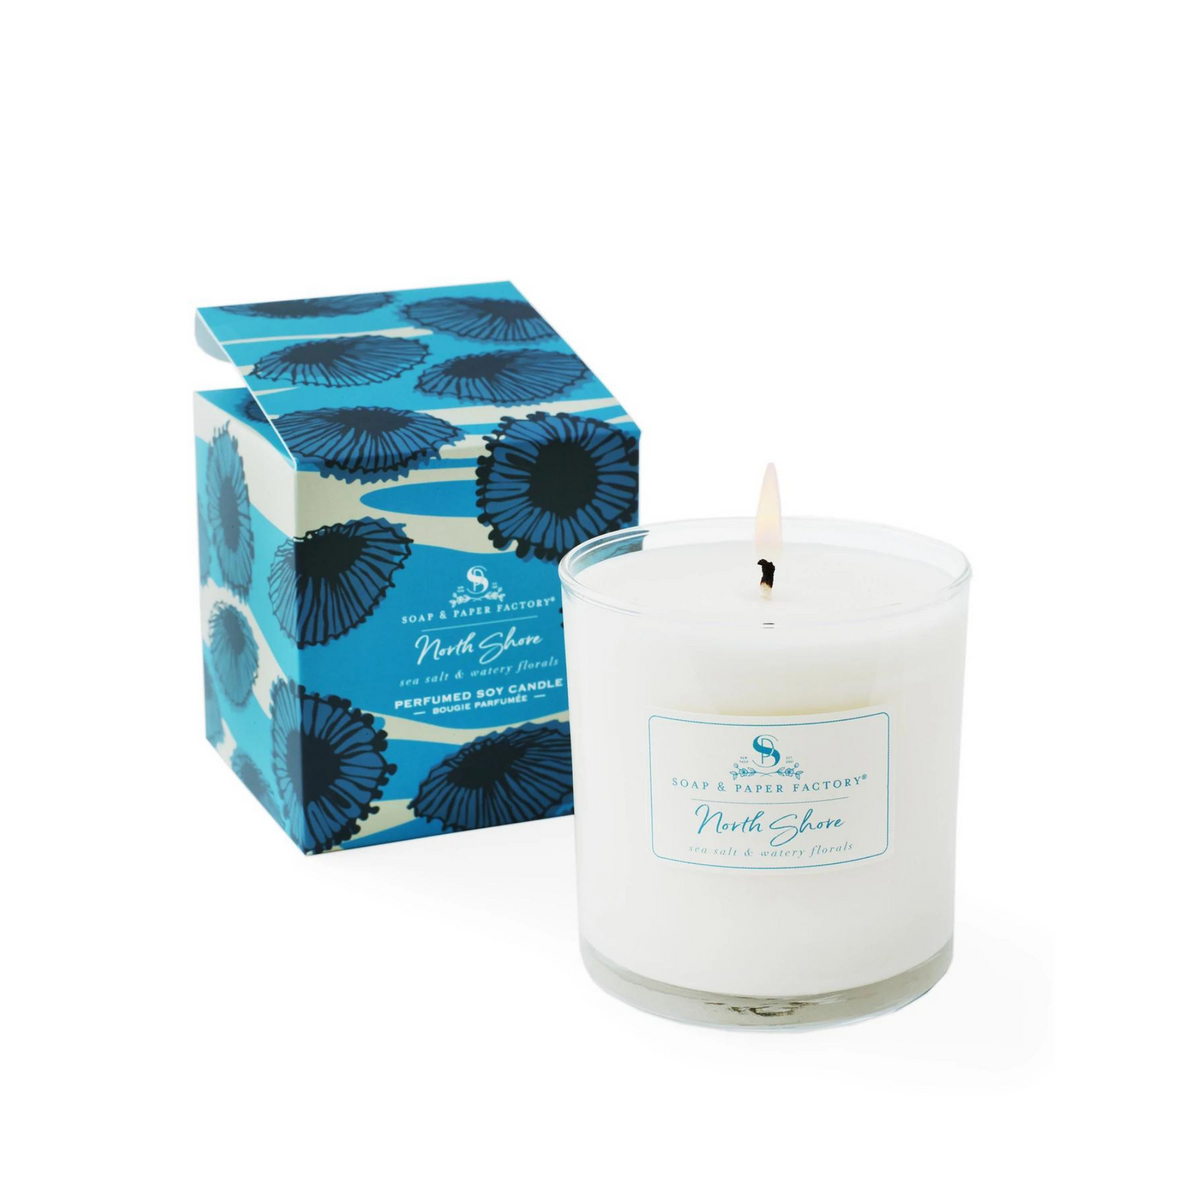 Primary Image of North Shore Large Soy Candle